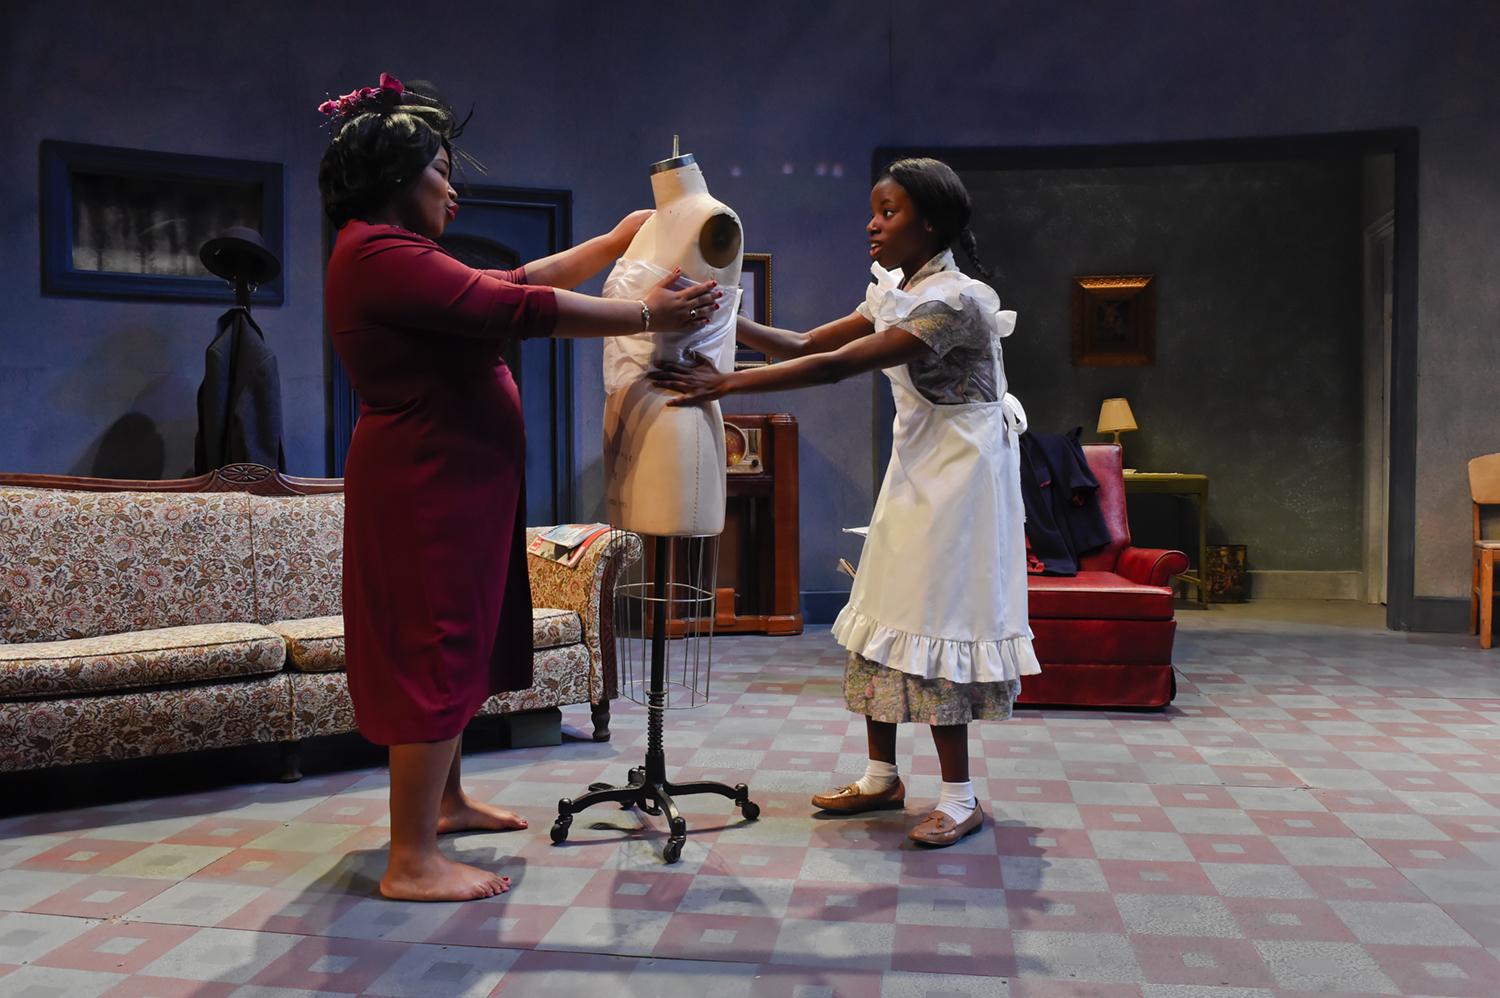 Jada performing in "Crumbs from the Table of Joy"